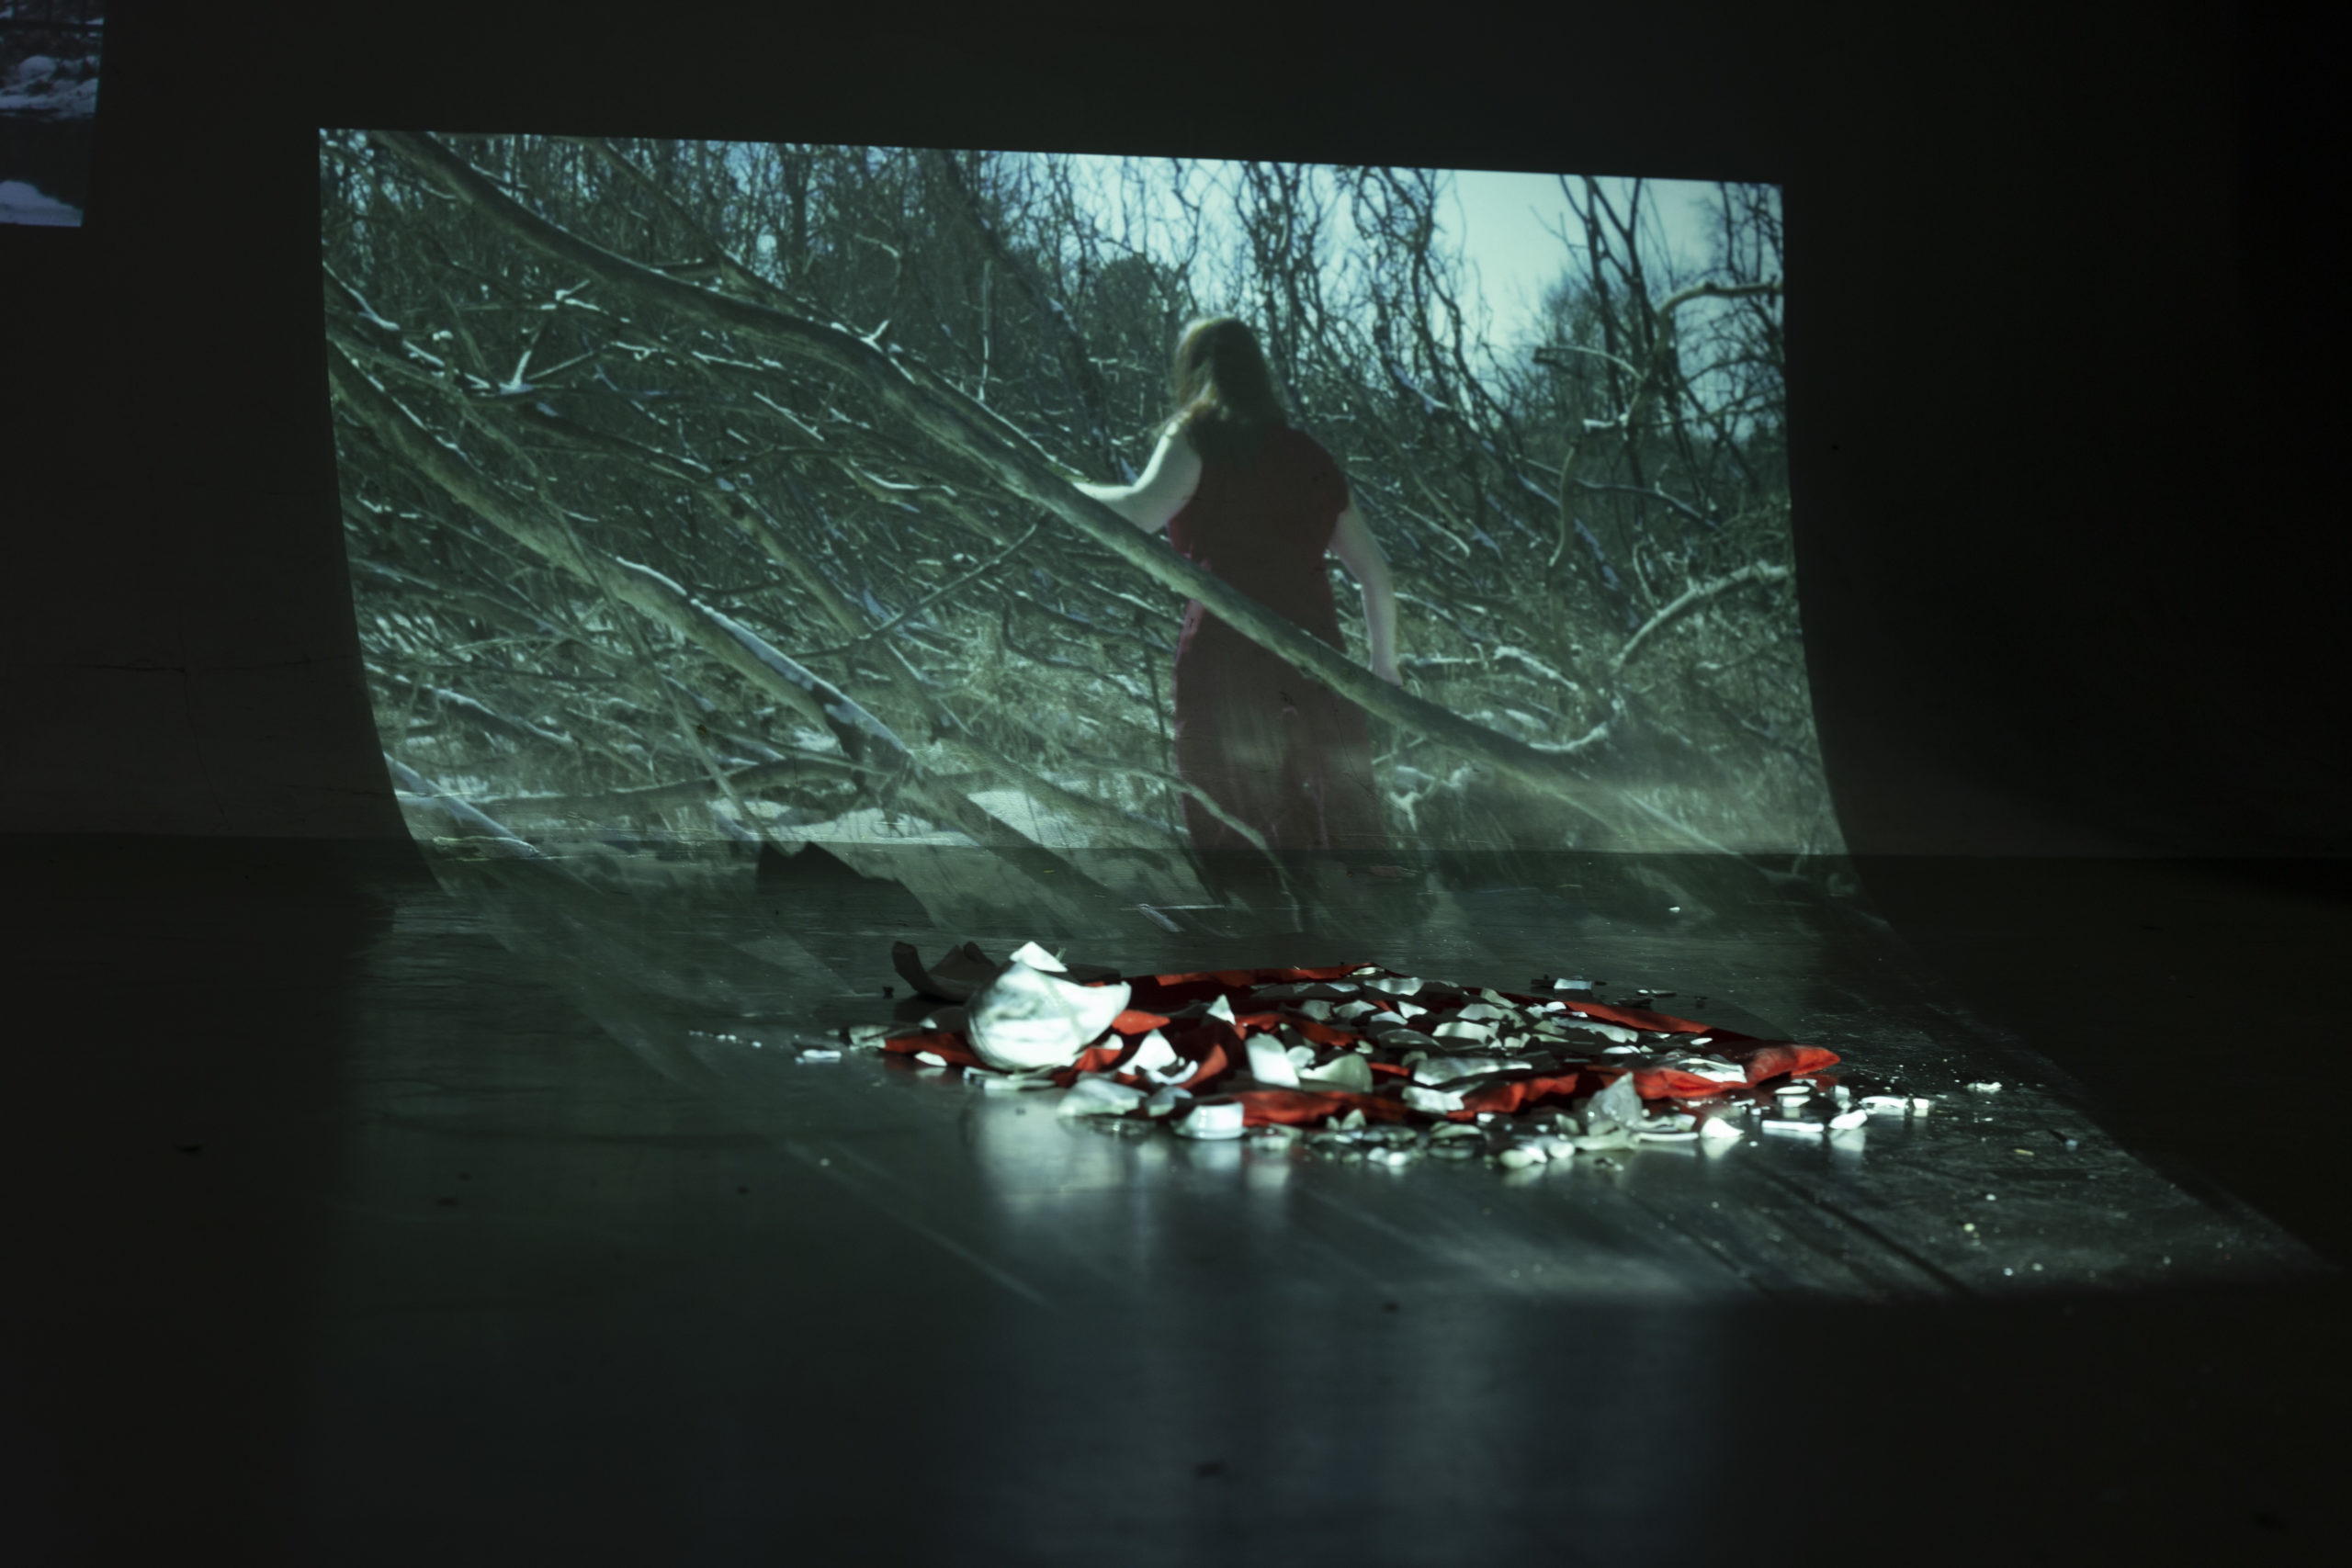 This image depicts the installation of the video"Red" 